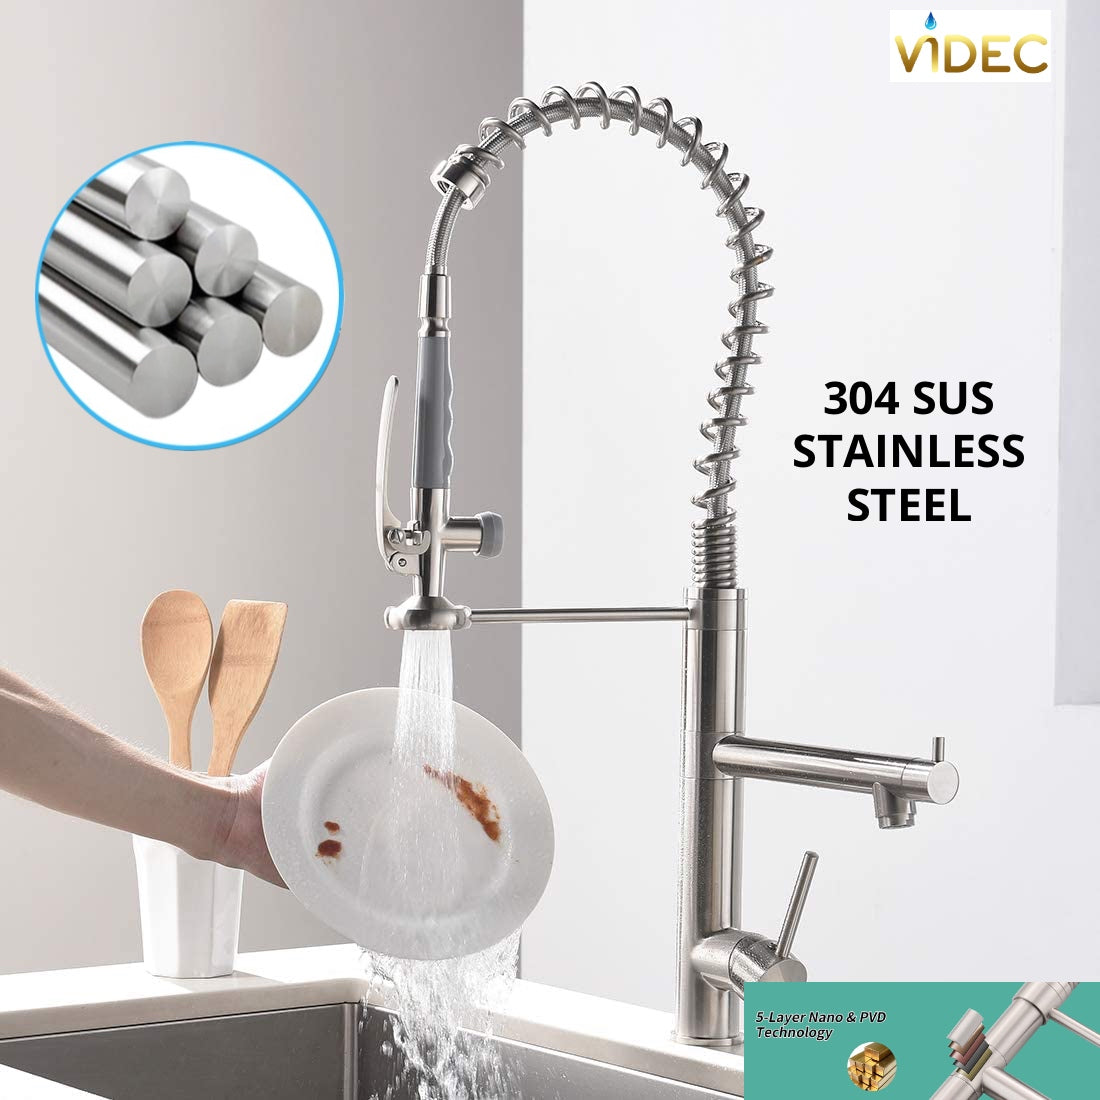 VIDEC KW-29SN Smart Kitchen Faucet, 3 Modes Pull Down Sprayer, LED Temperature Control, Ceramic Valve, 360-Degree Rotation, 1 or 3 Hole Deck Plate.